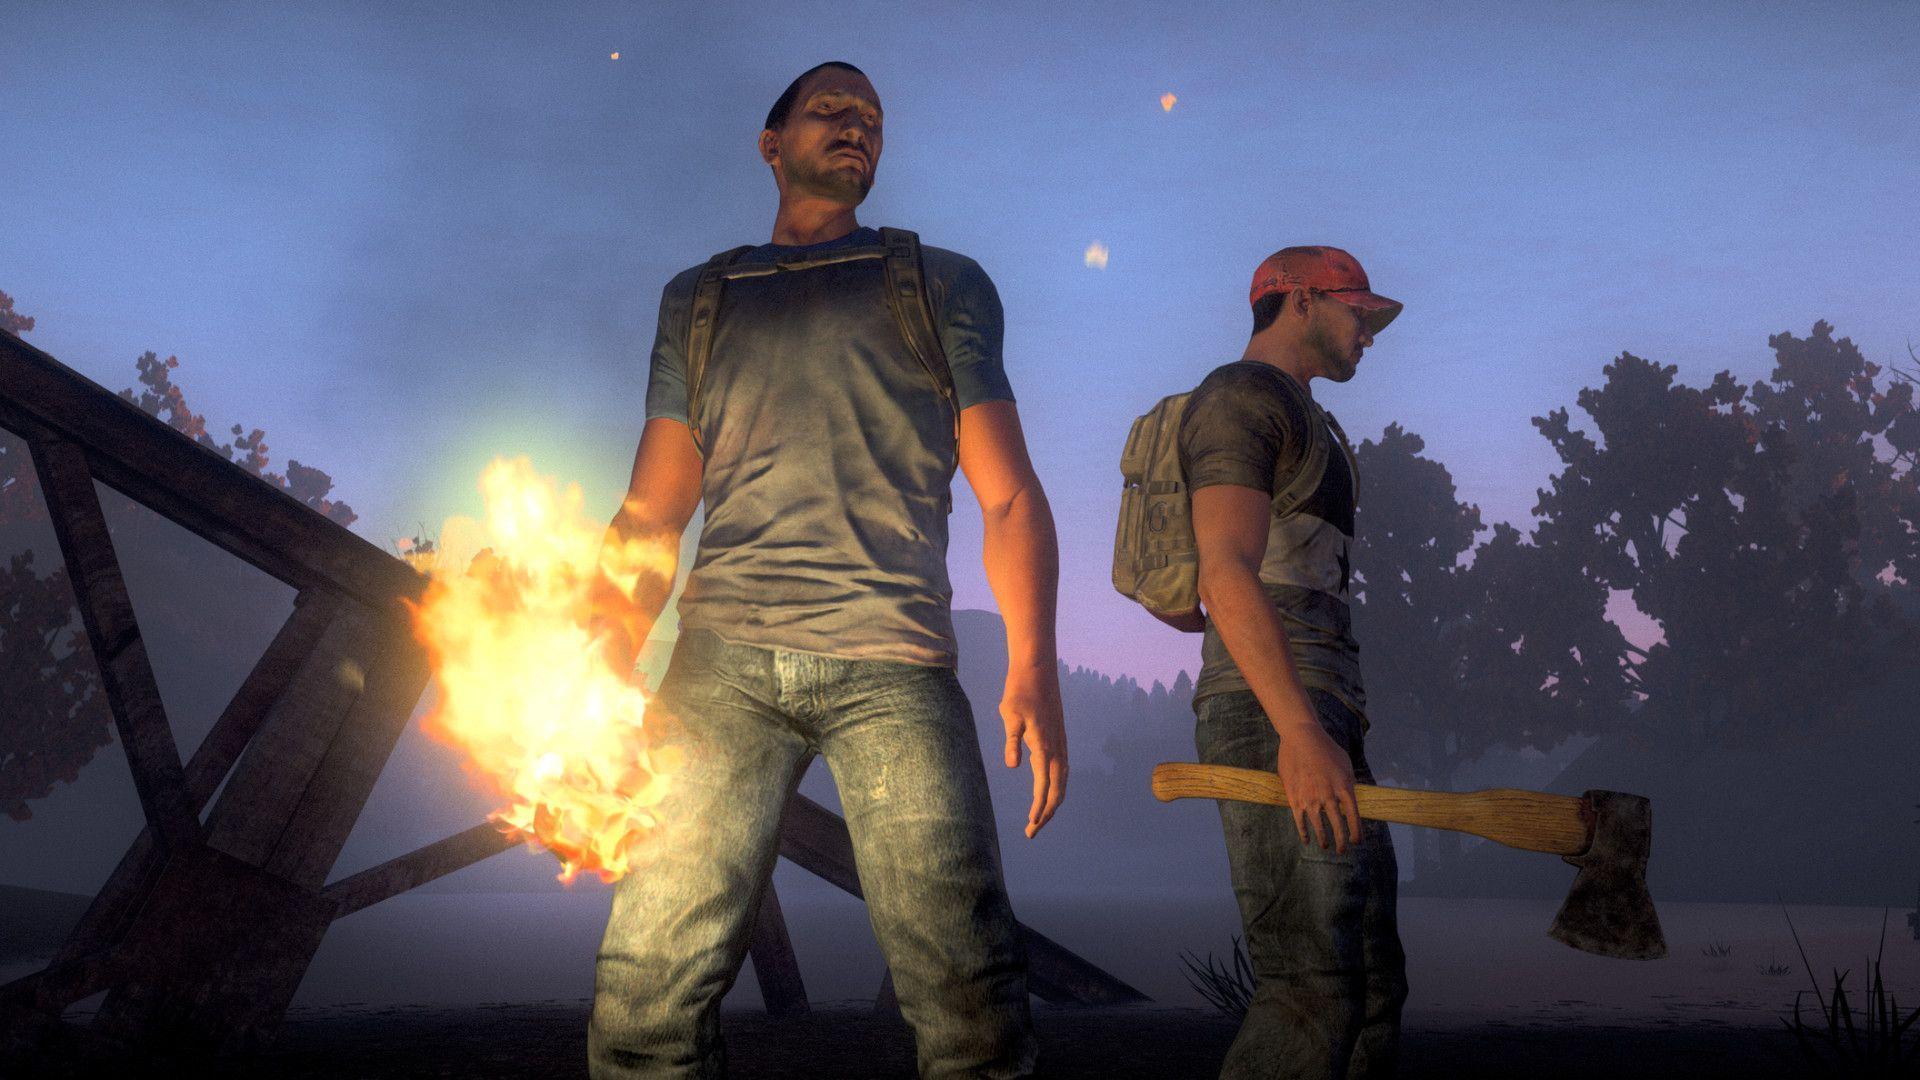 H1Z1: King of the Kill + Just Survive Steam PC CD Keys. Best